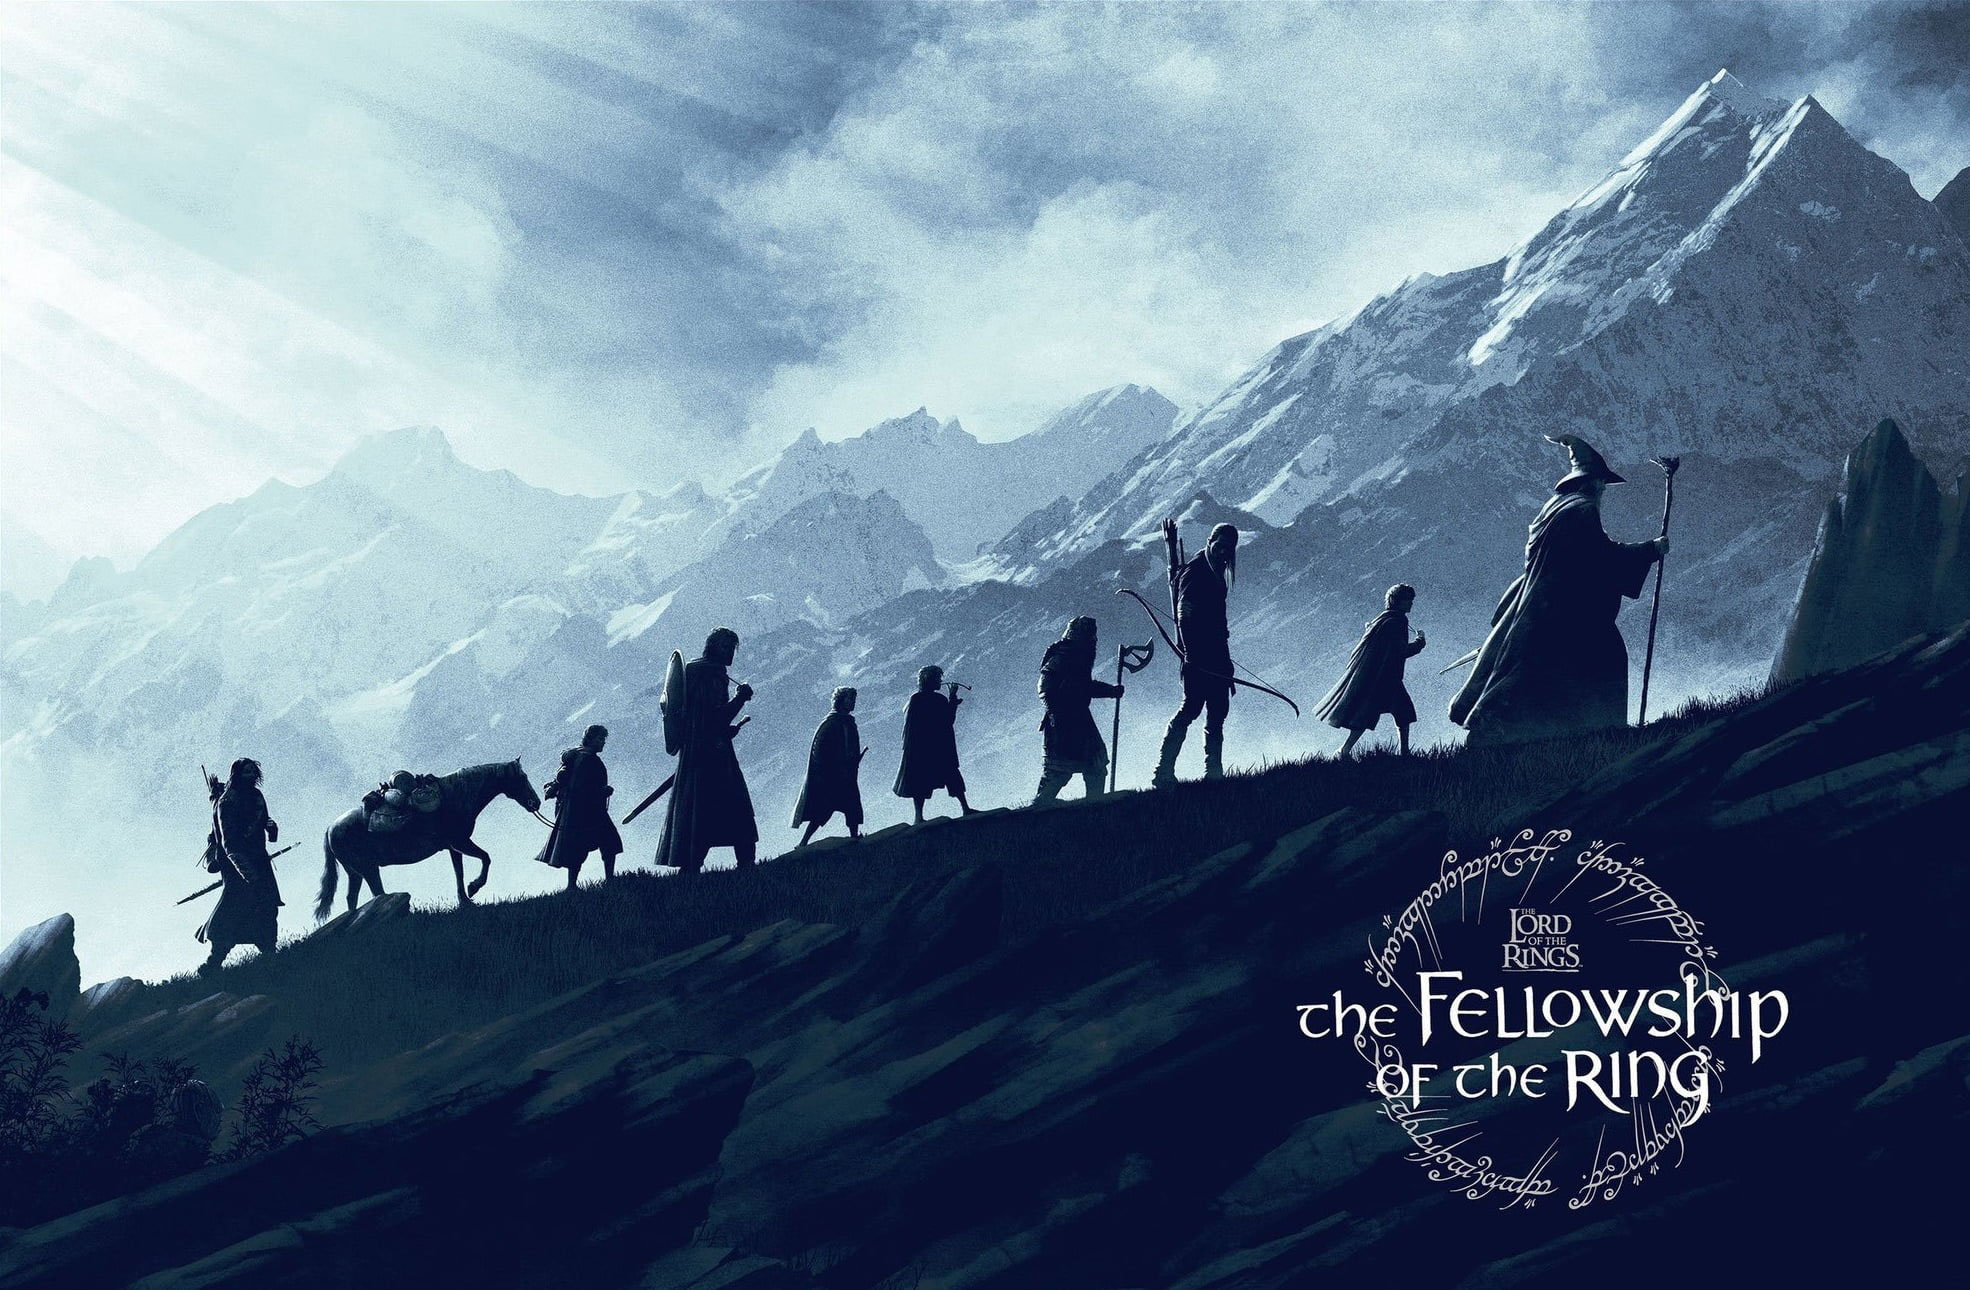 Wallpaper Movies, Fantasy Art, The Lord Of The Rings